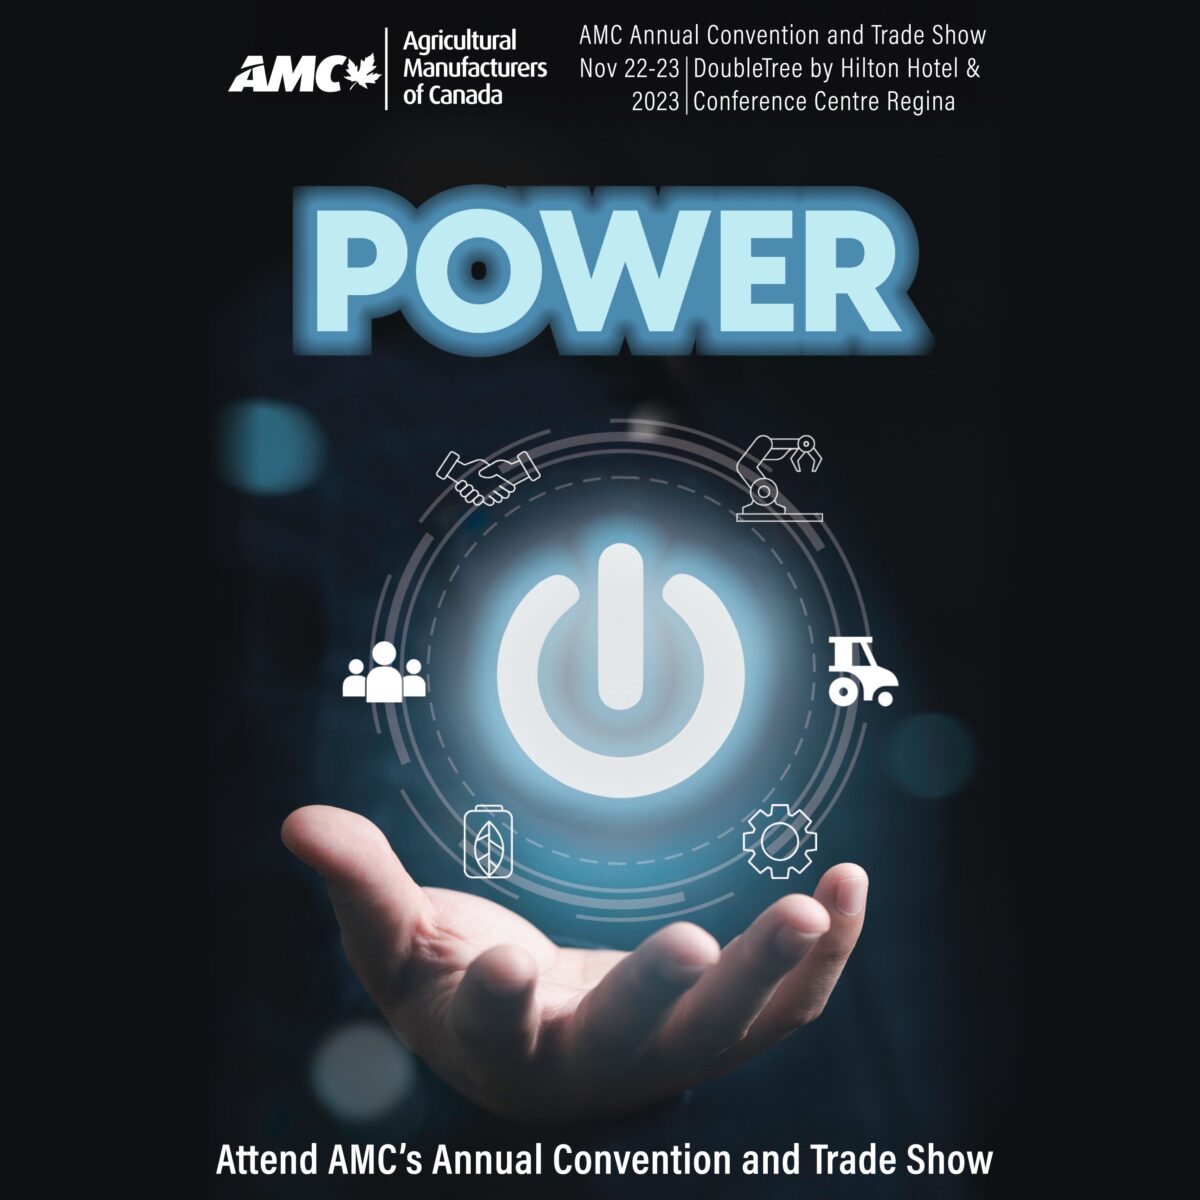 Attend AMC's Annual Convention and Trade Show, themed Power. 